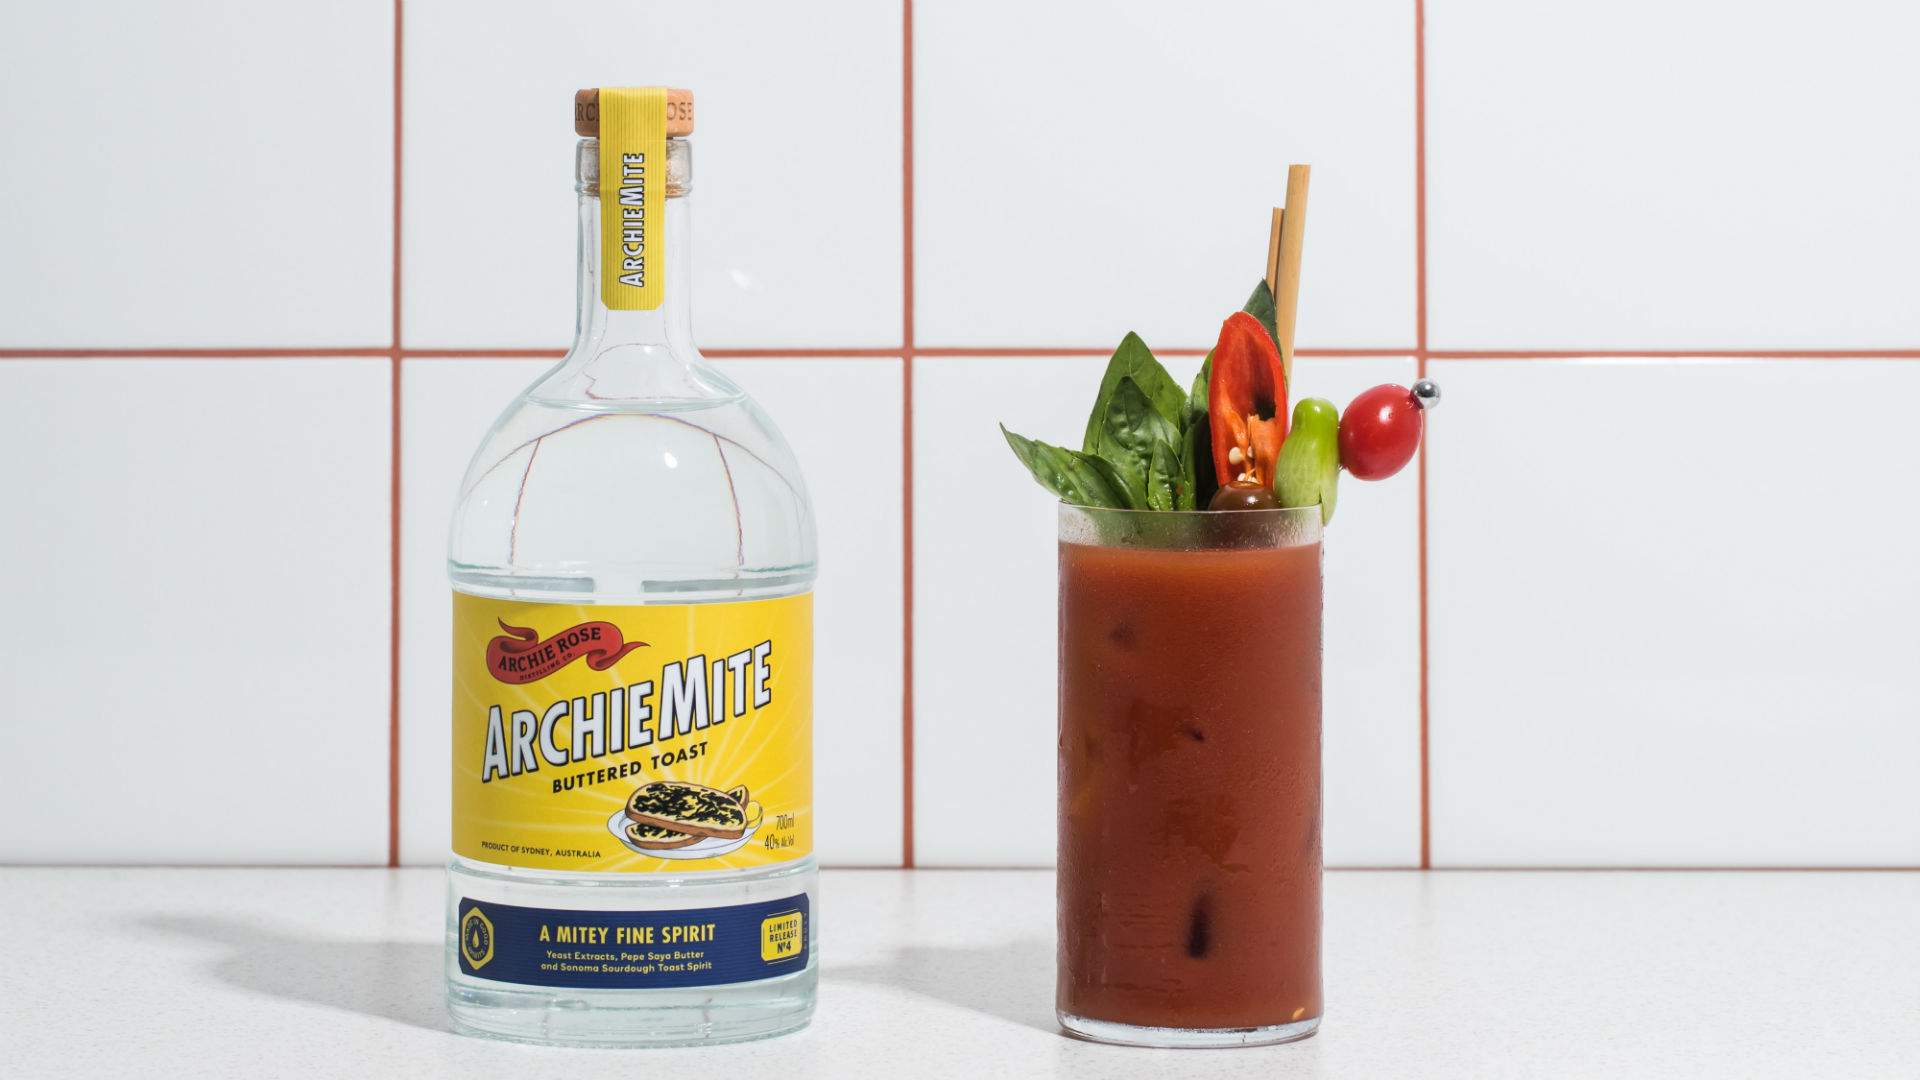 You Can Now Drink Your Vegemite on Toast Thanks to Archie Rose's New Spirit